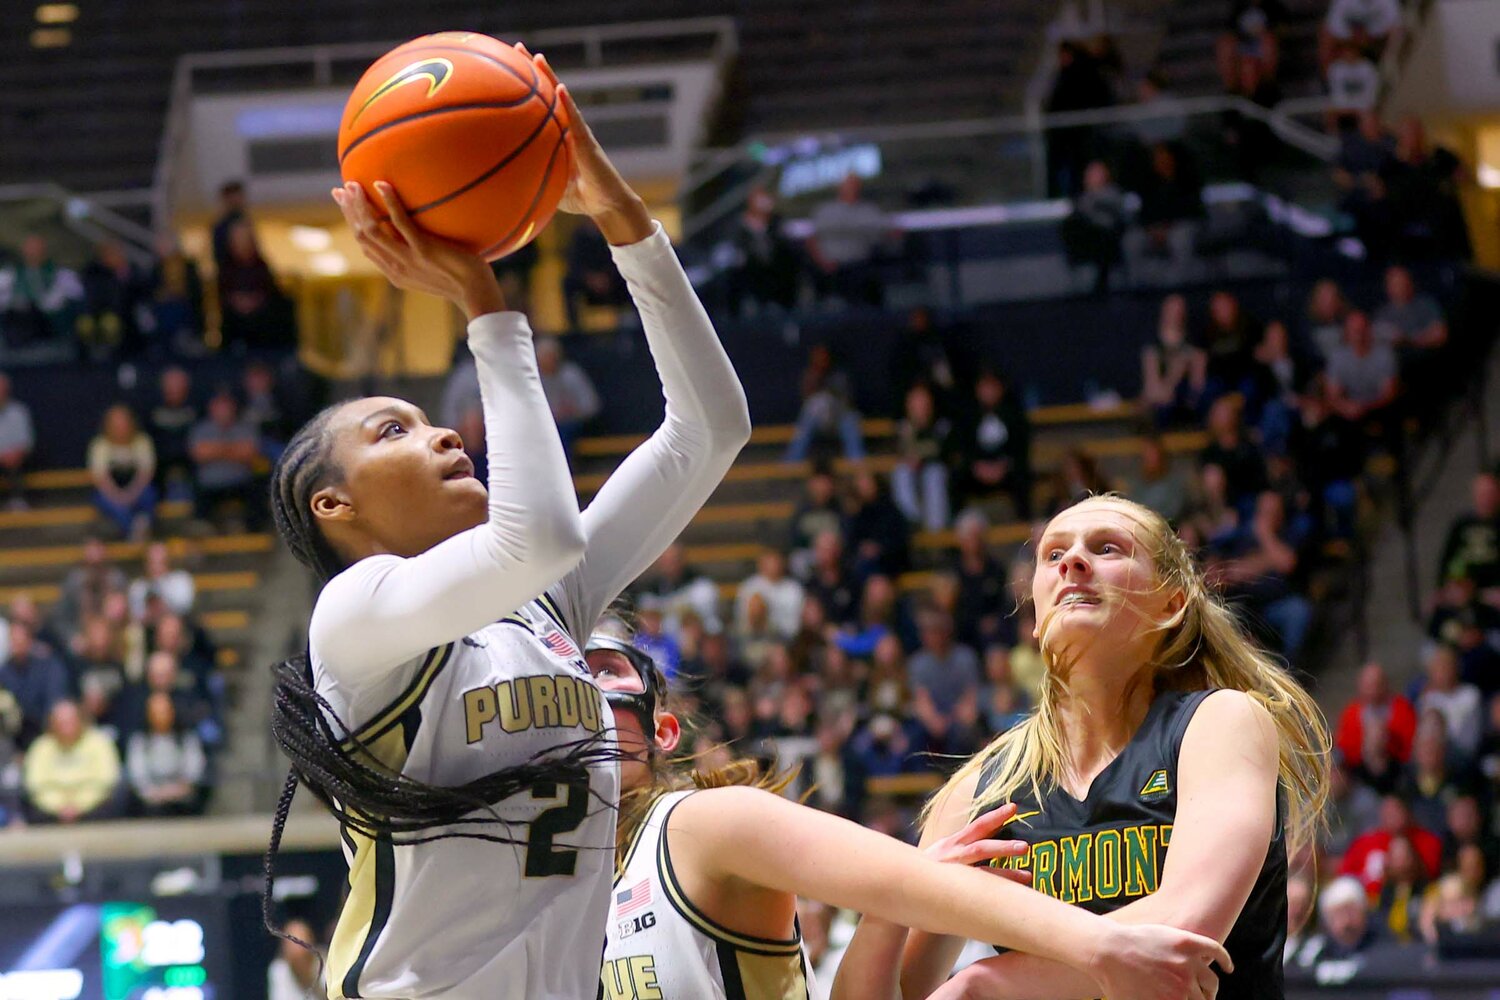 Rashonda Jones of Purdue - going up for a lay-up against Vermont